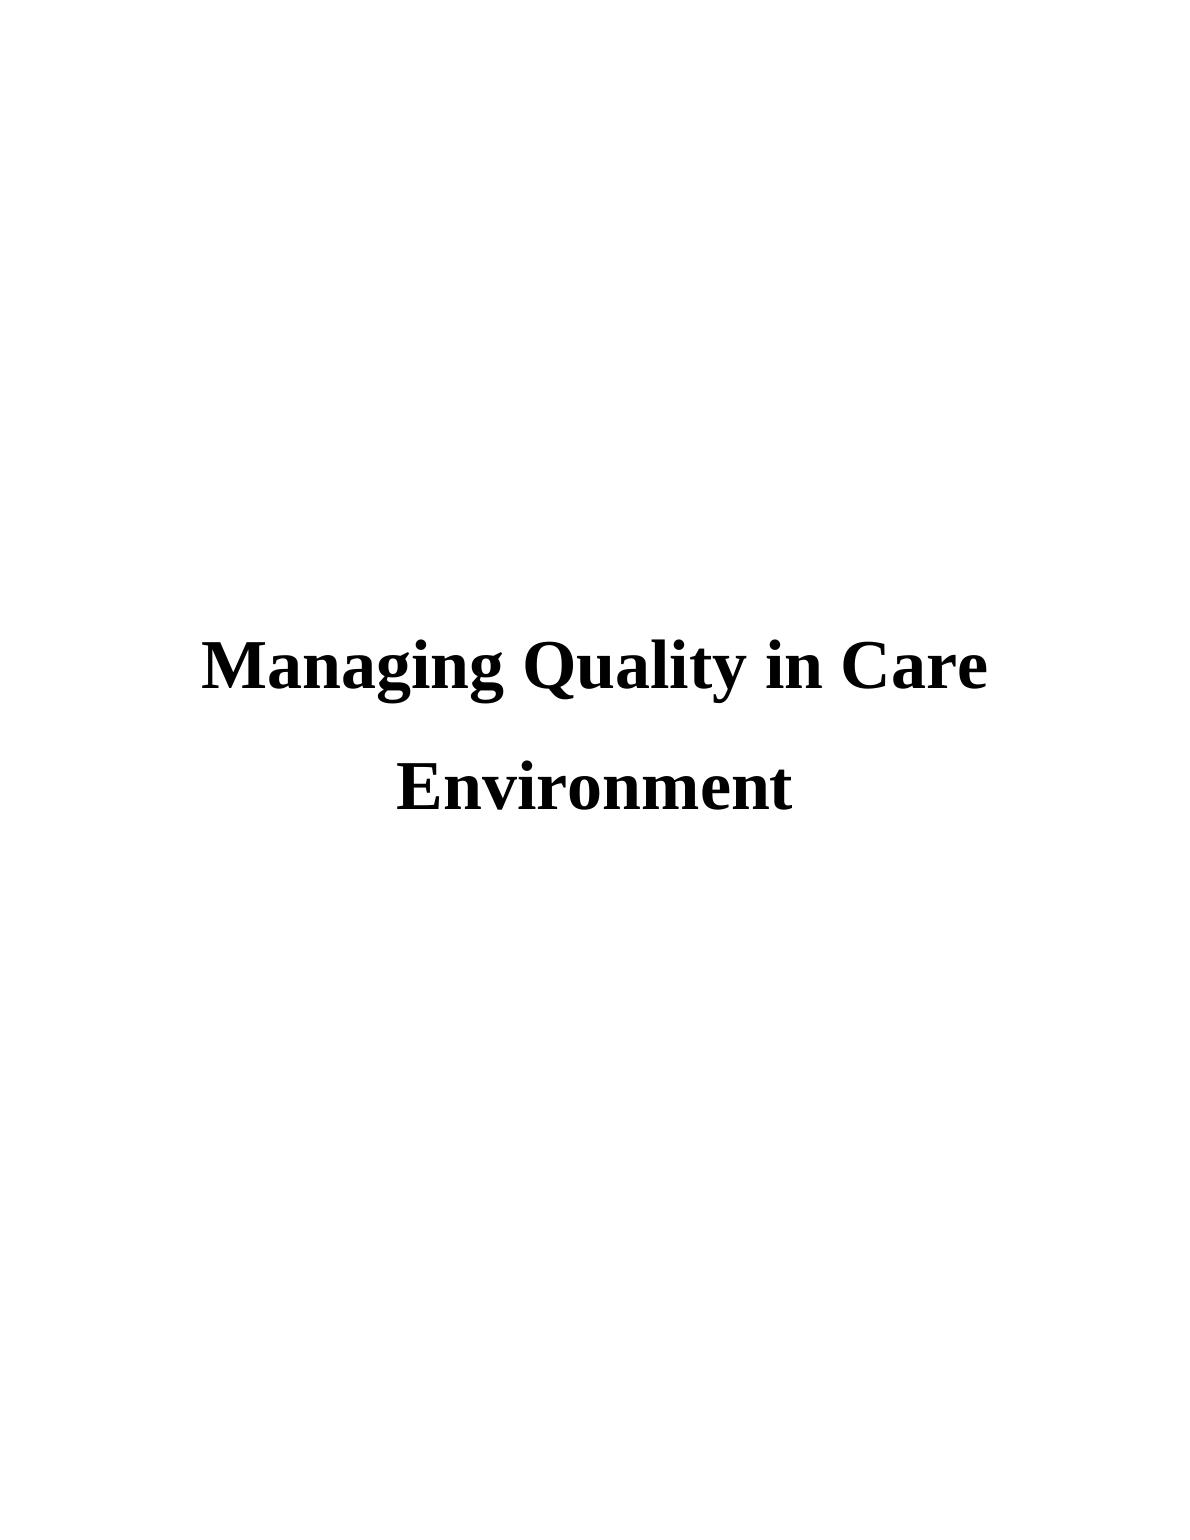 Managing Quality in Care Environment: Legislations, Diversity, Safeguarding, and Patient Relations_1